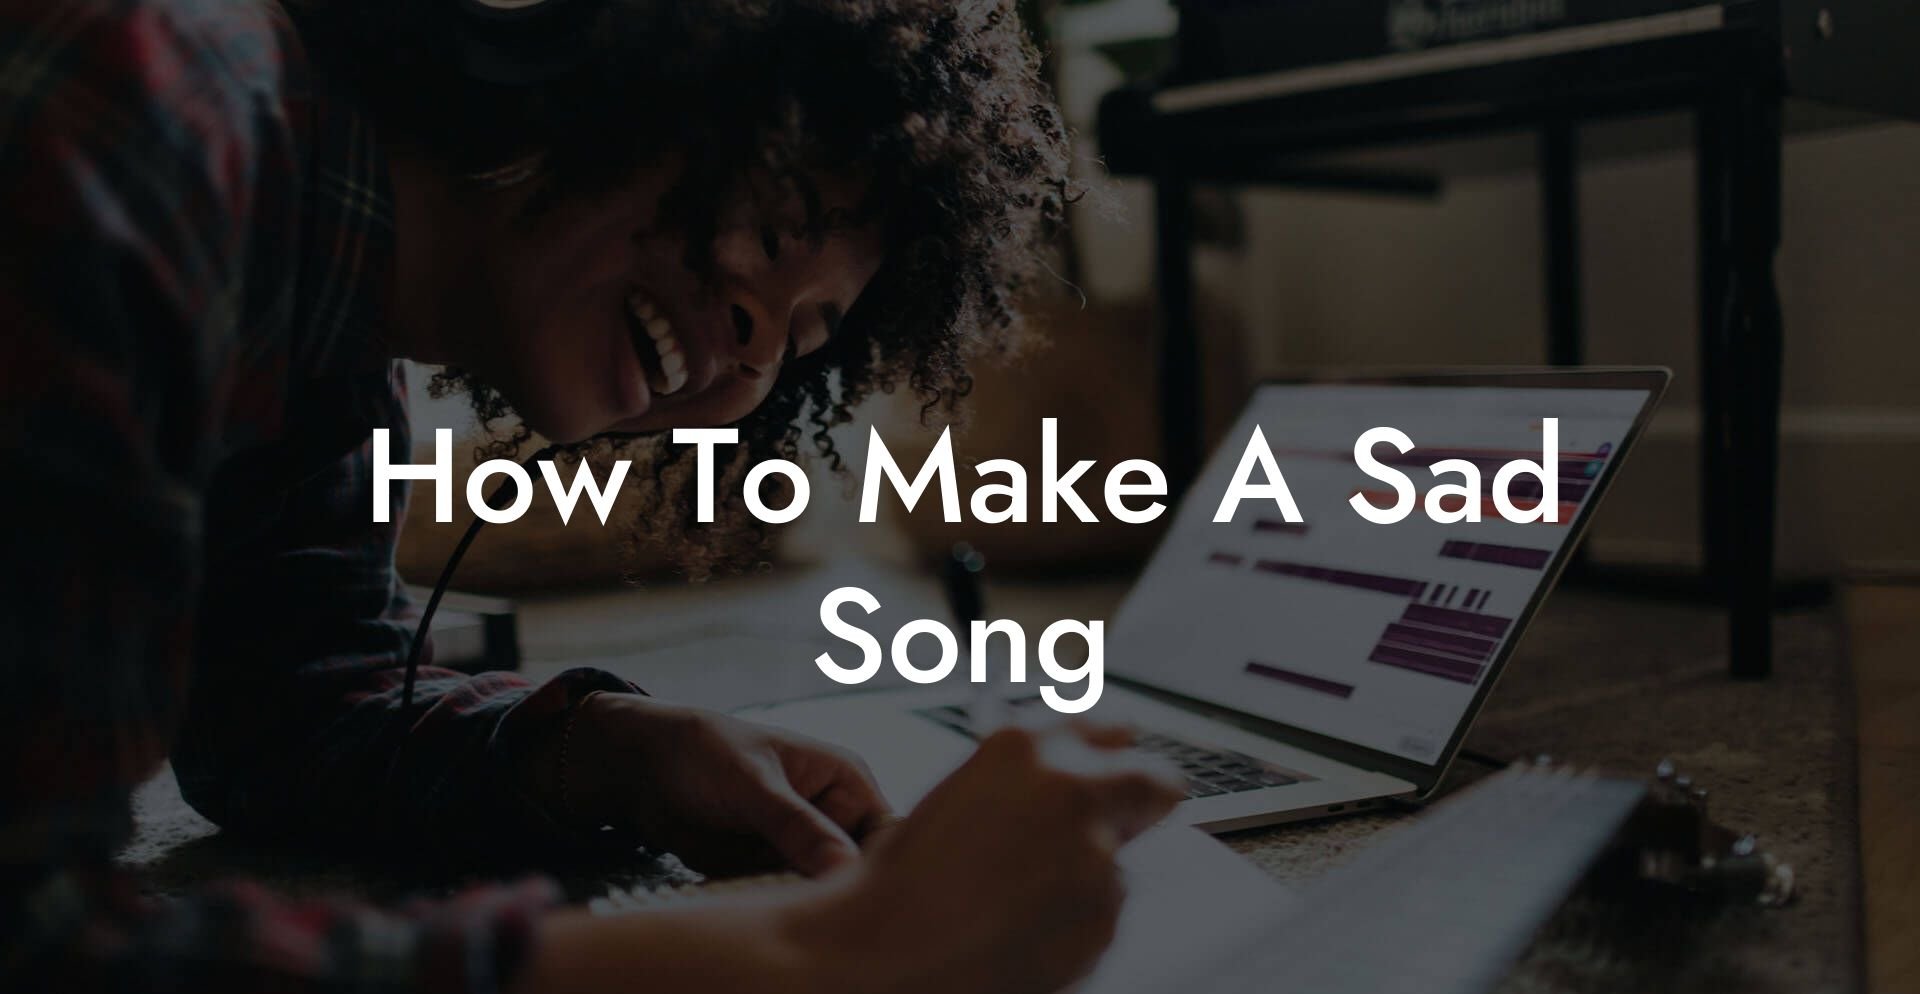 how to make a sad song lyric assistant